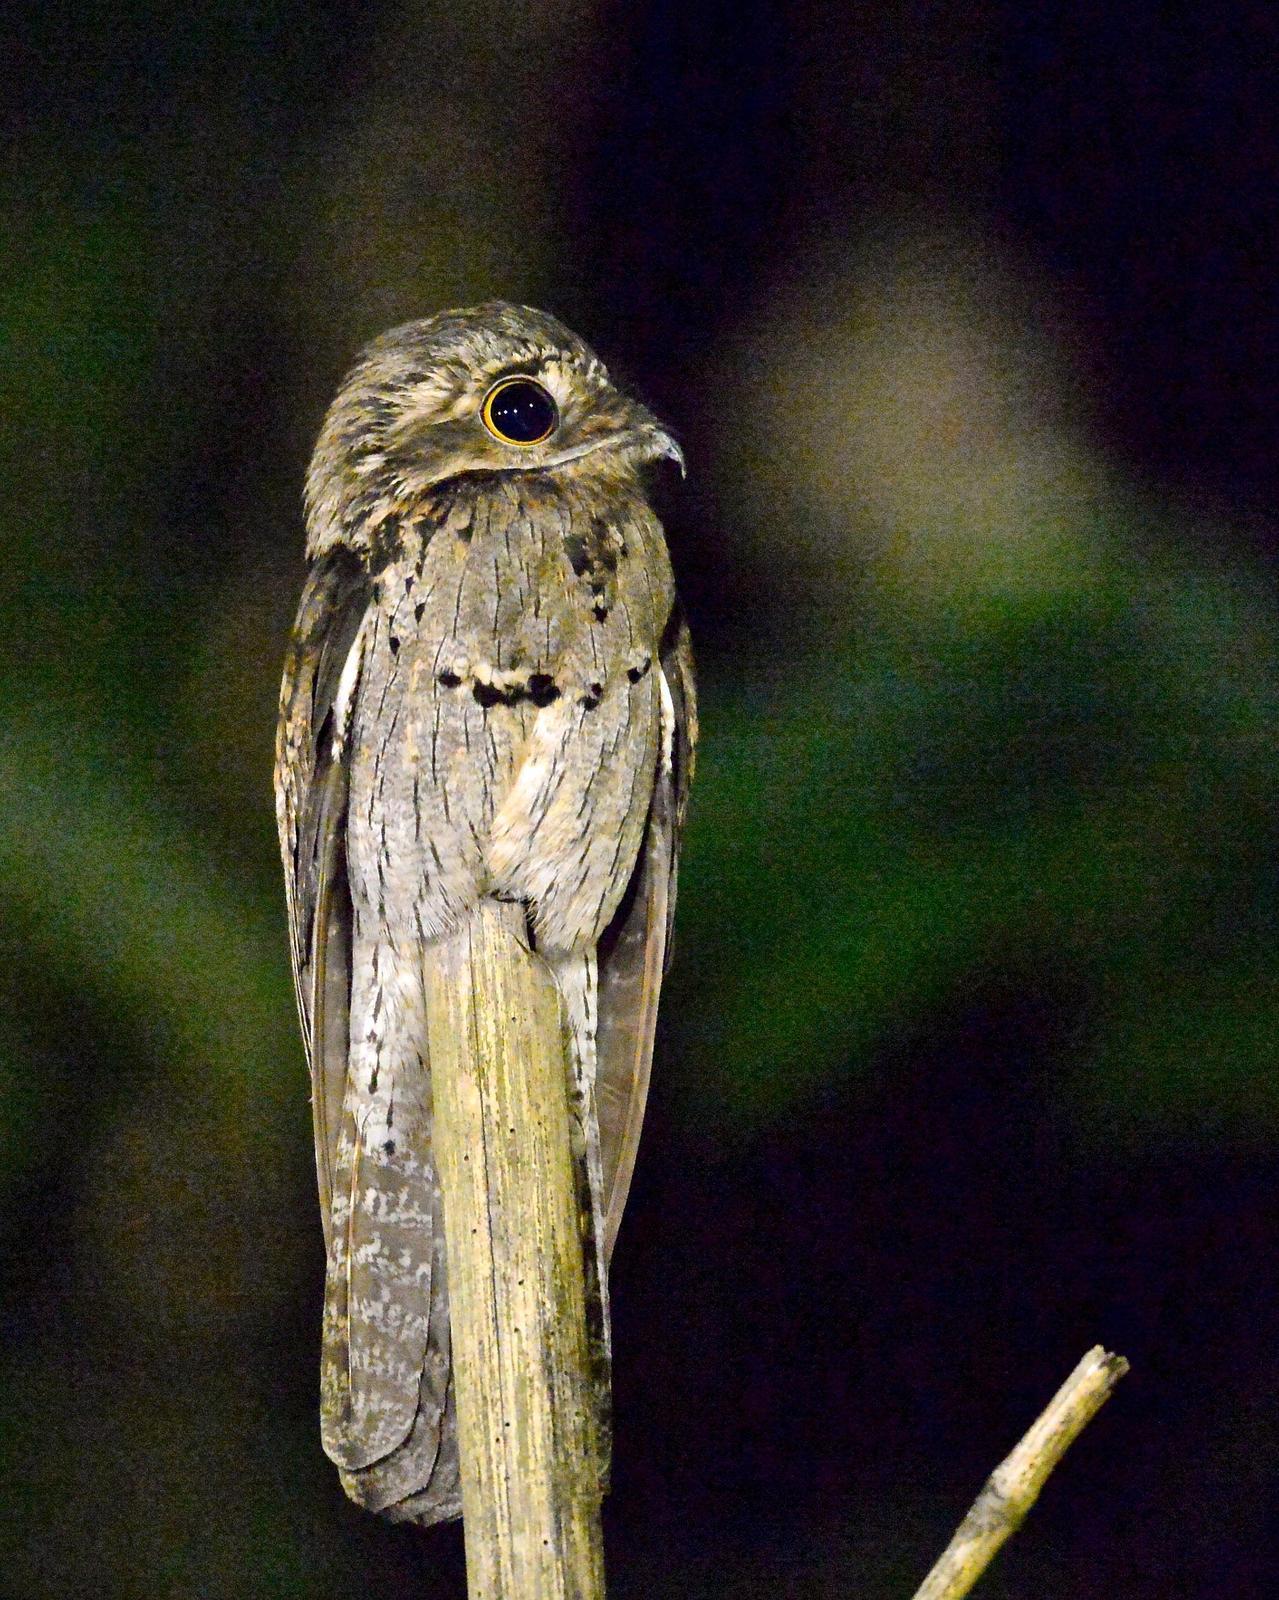 Common Potoo Photo by Gerald Friesen